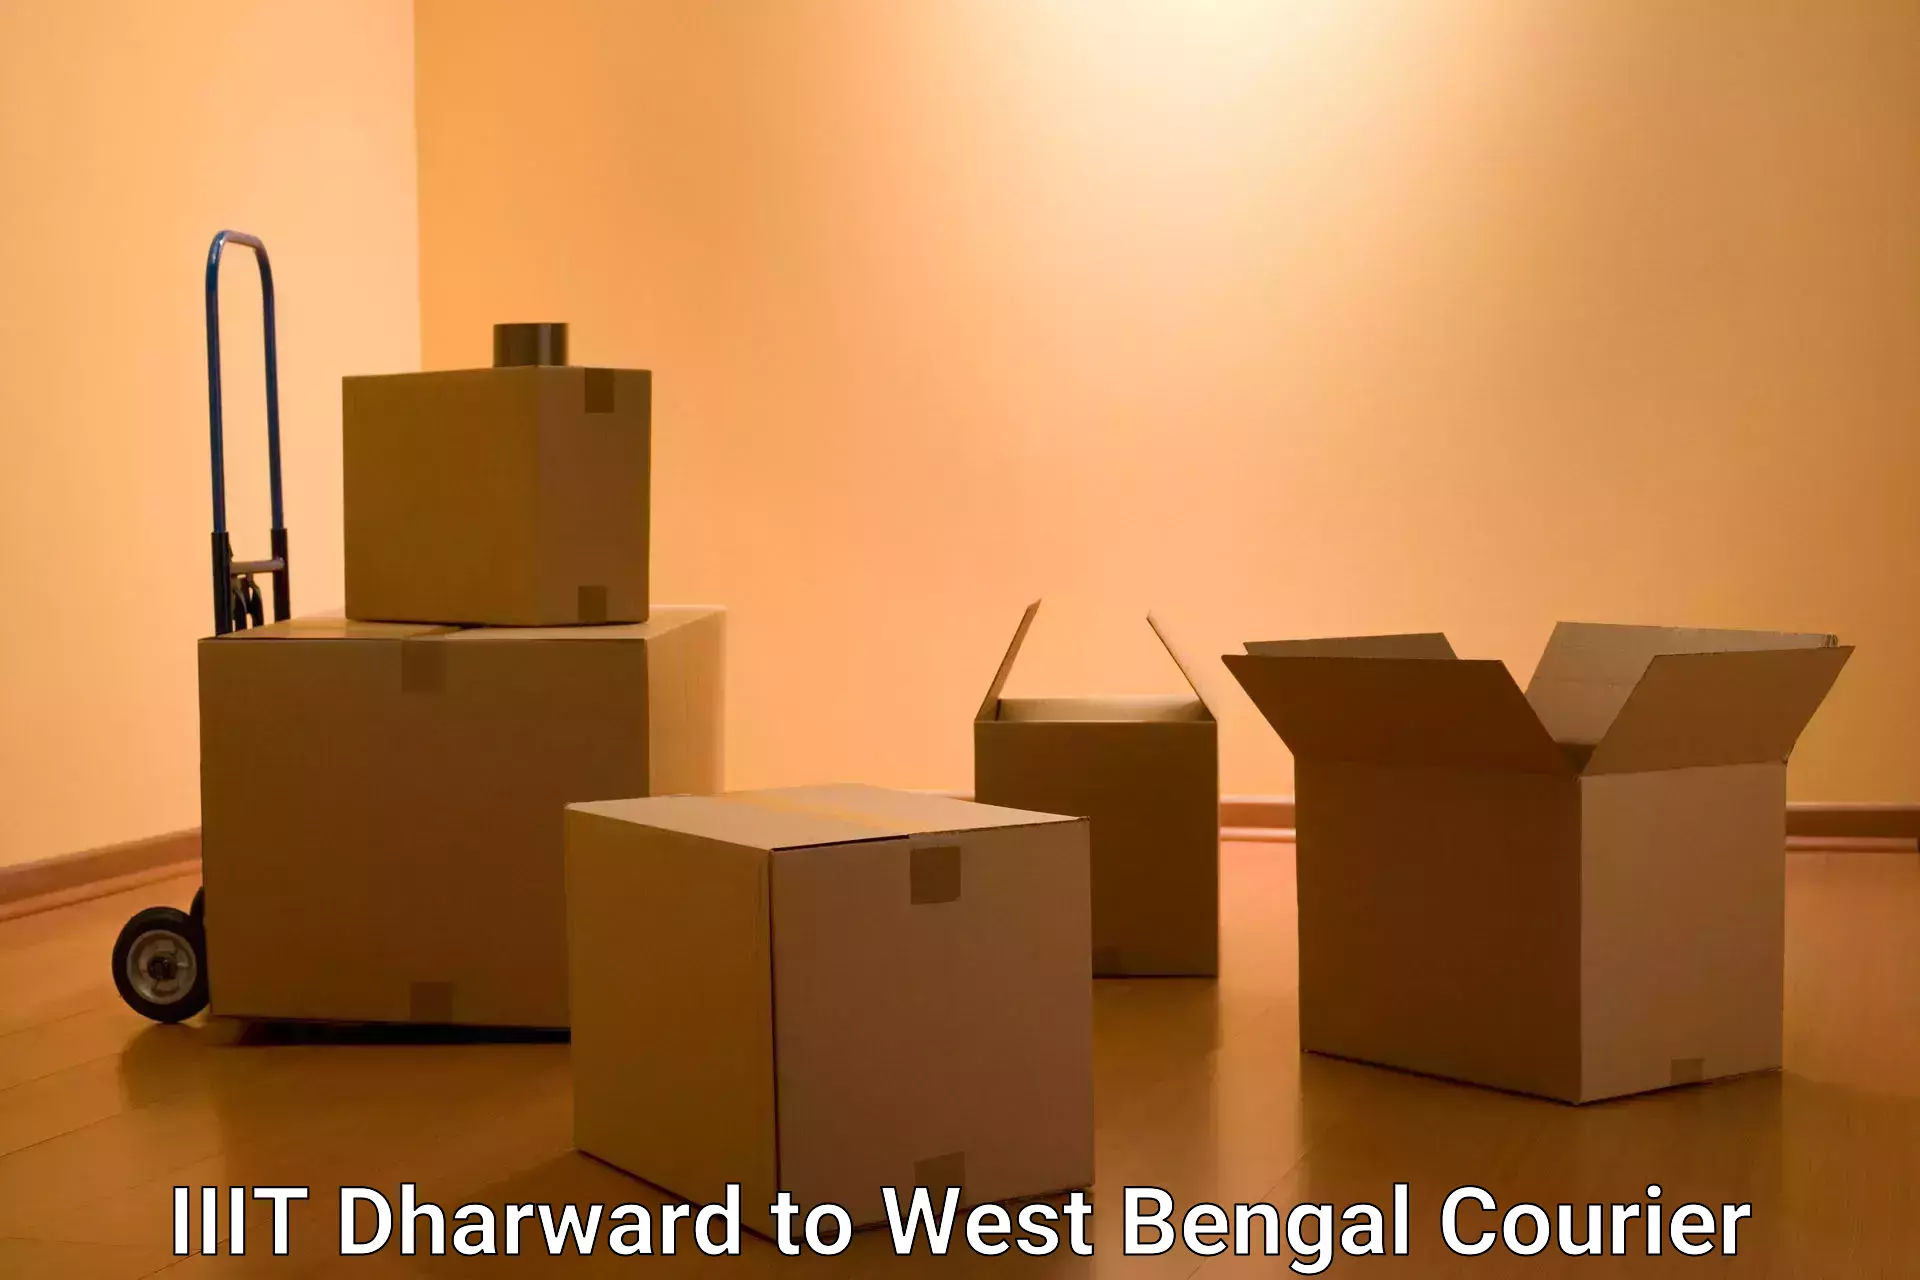 Nationwide delivery network IIIT Dharward to West Bengal